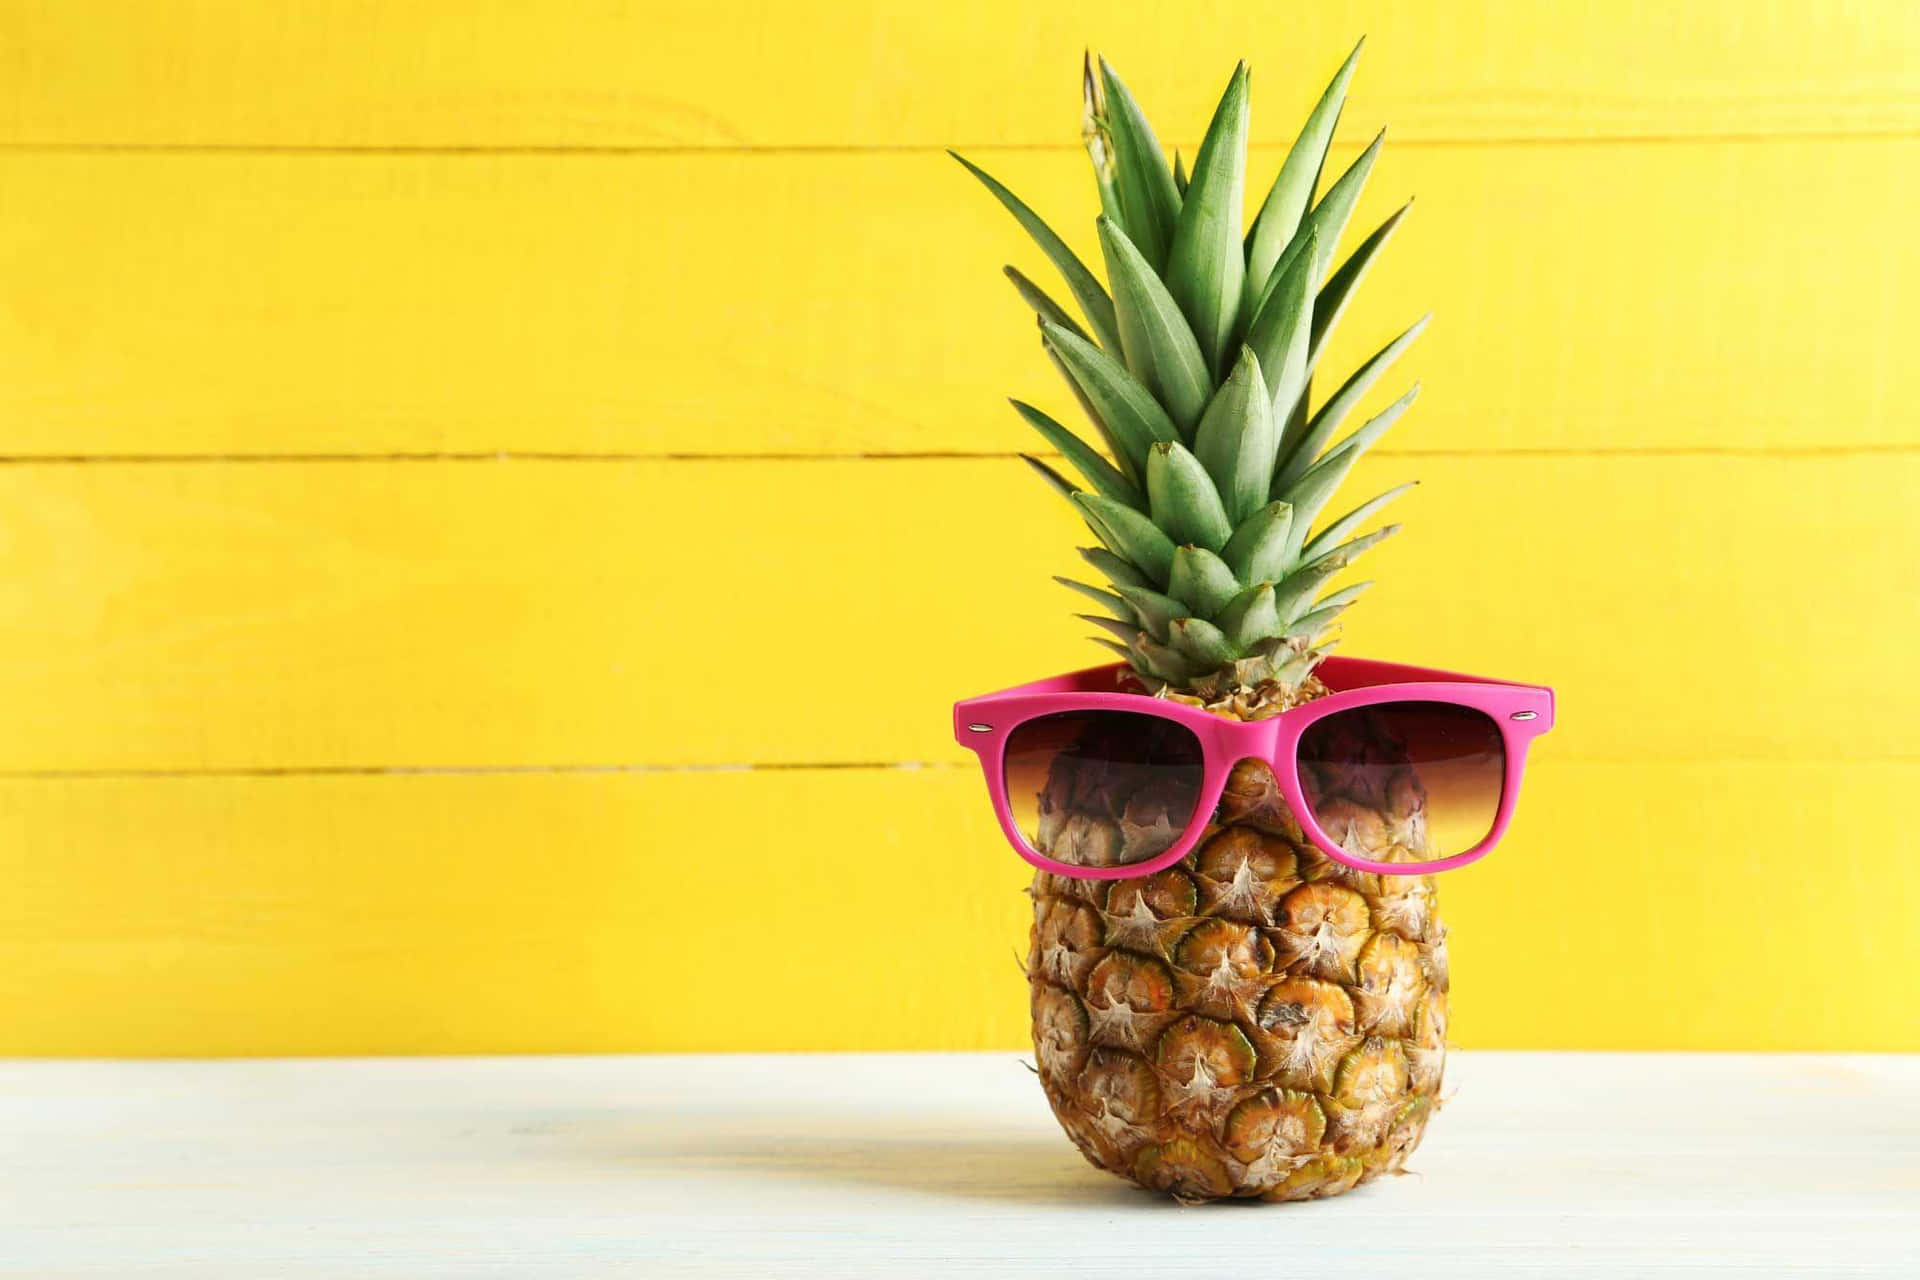 A Pineapple With Sunglasses On It On A Yellow Background Wallpaper